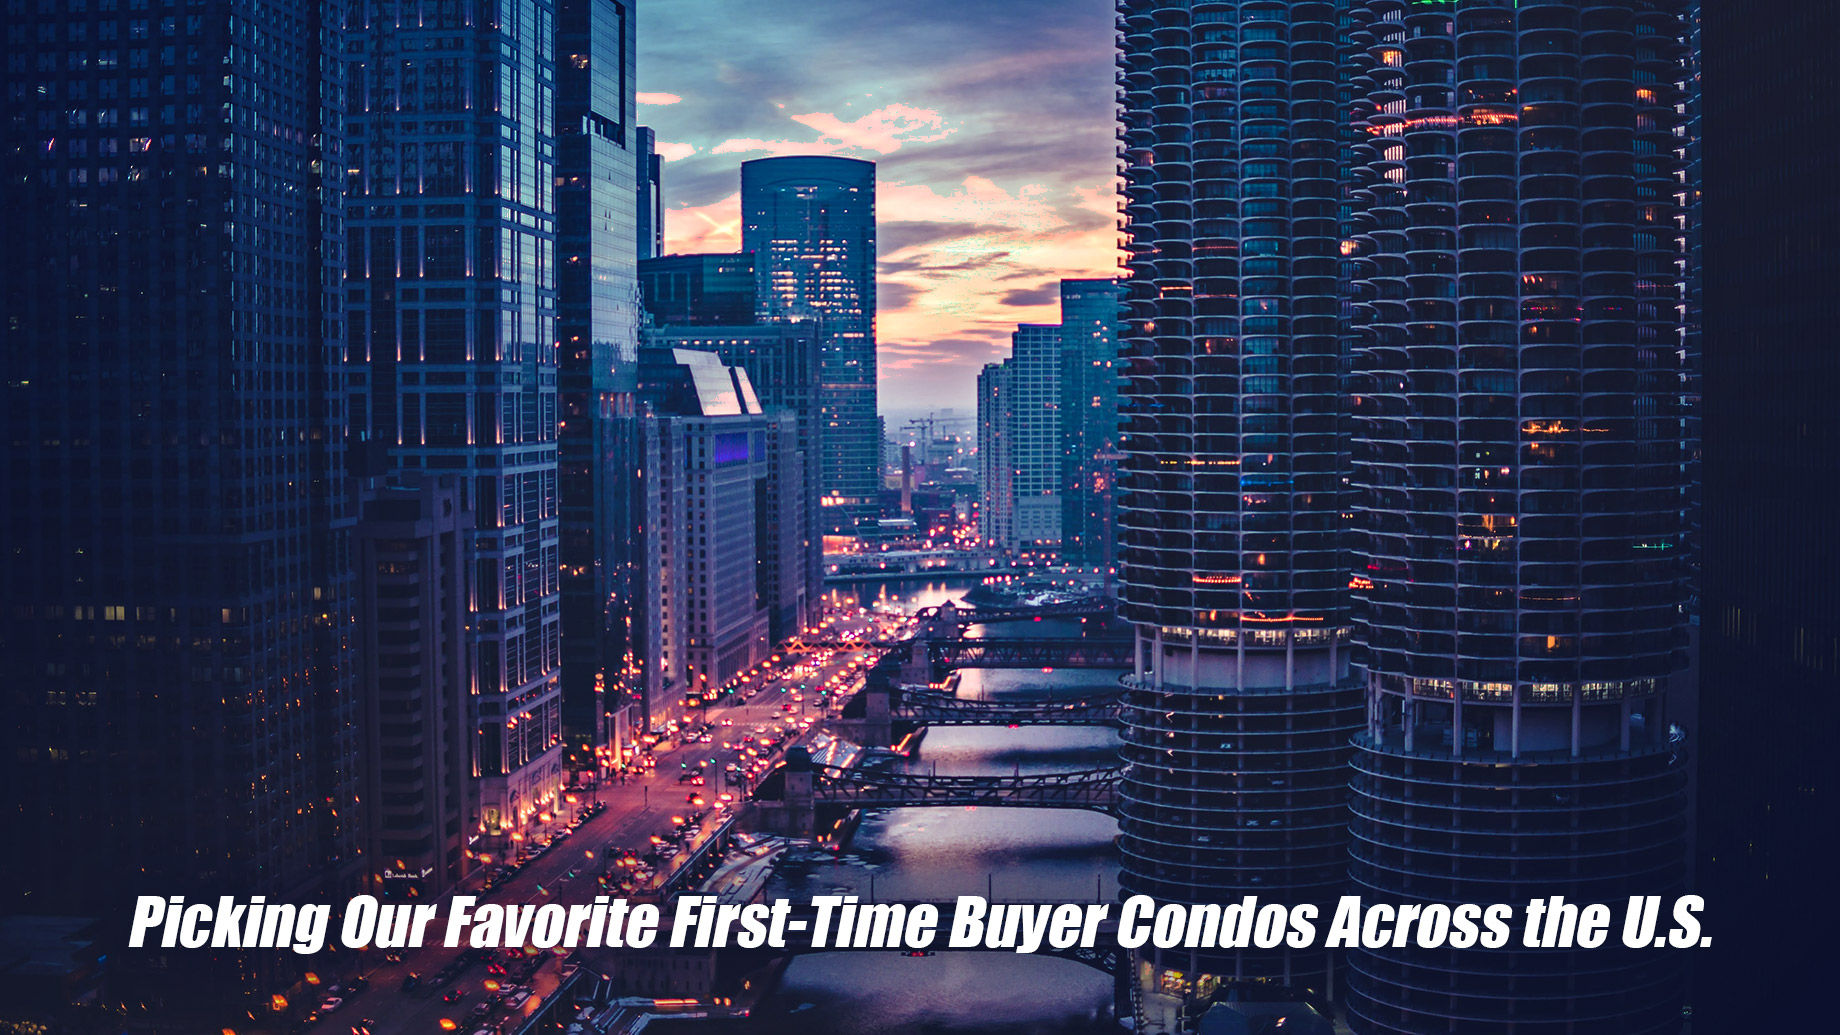 Picking Our Favorite First-Time Buyer Condos Across the U.S.